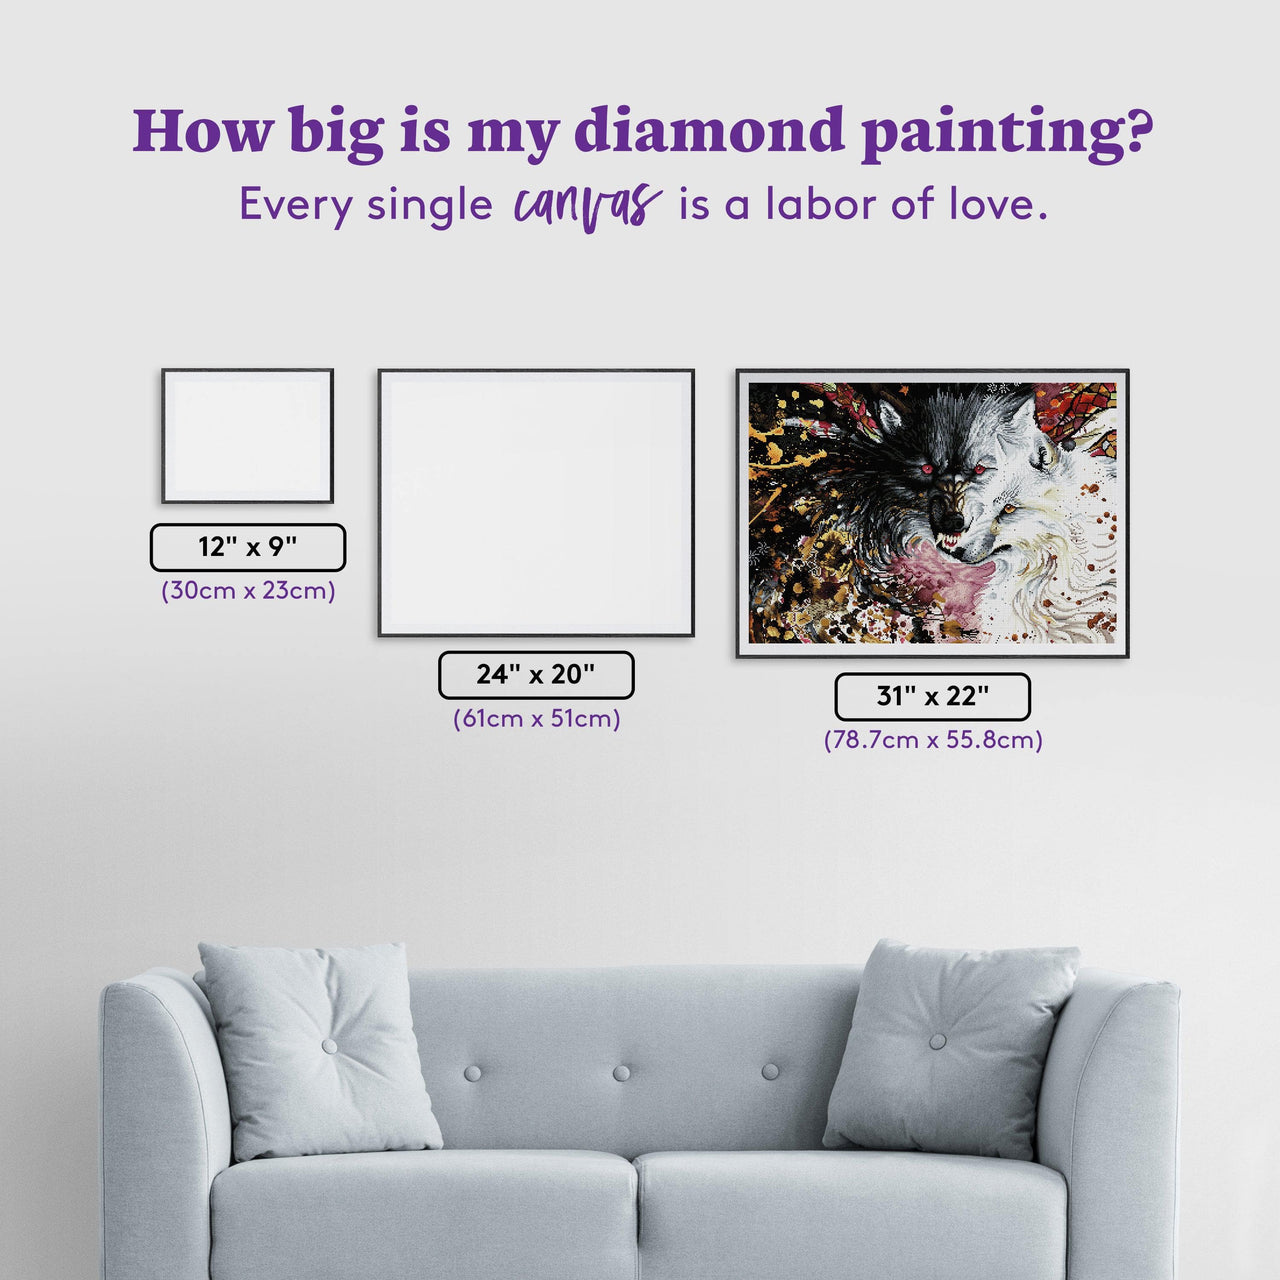 Diamond Painting Black and White 31" x 22" (78.7cm x 55.8cm) / Square with 47 Colors including 2 ABs and 1 Fairy Dust Diamonds and 2 Iridescent Diamonds / 70,784